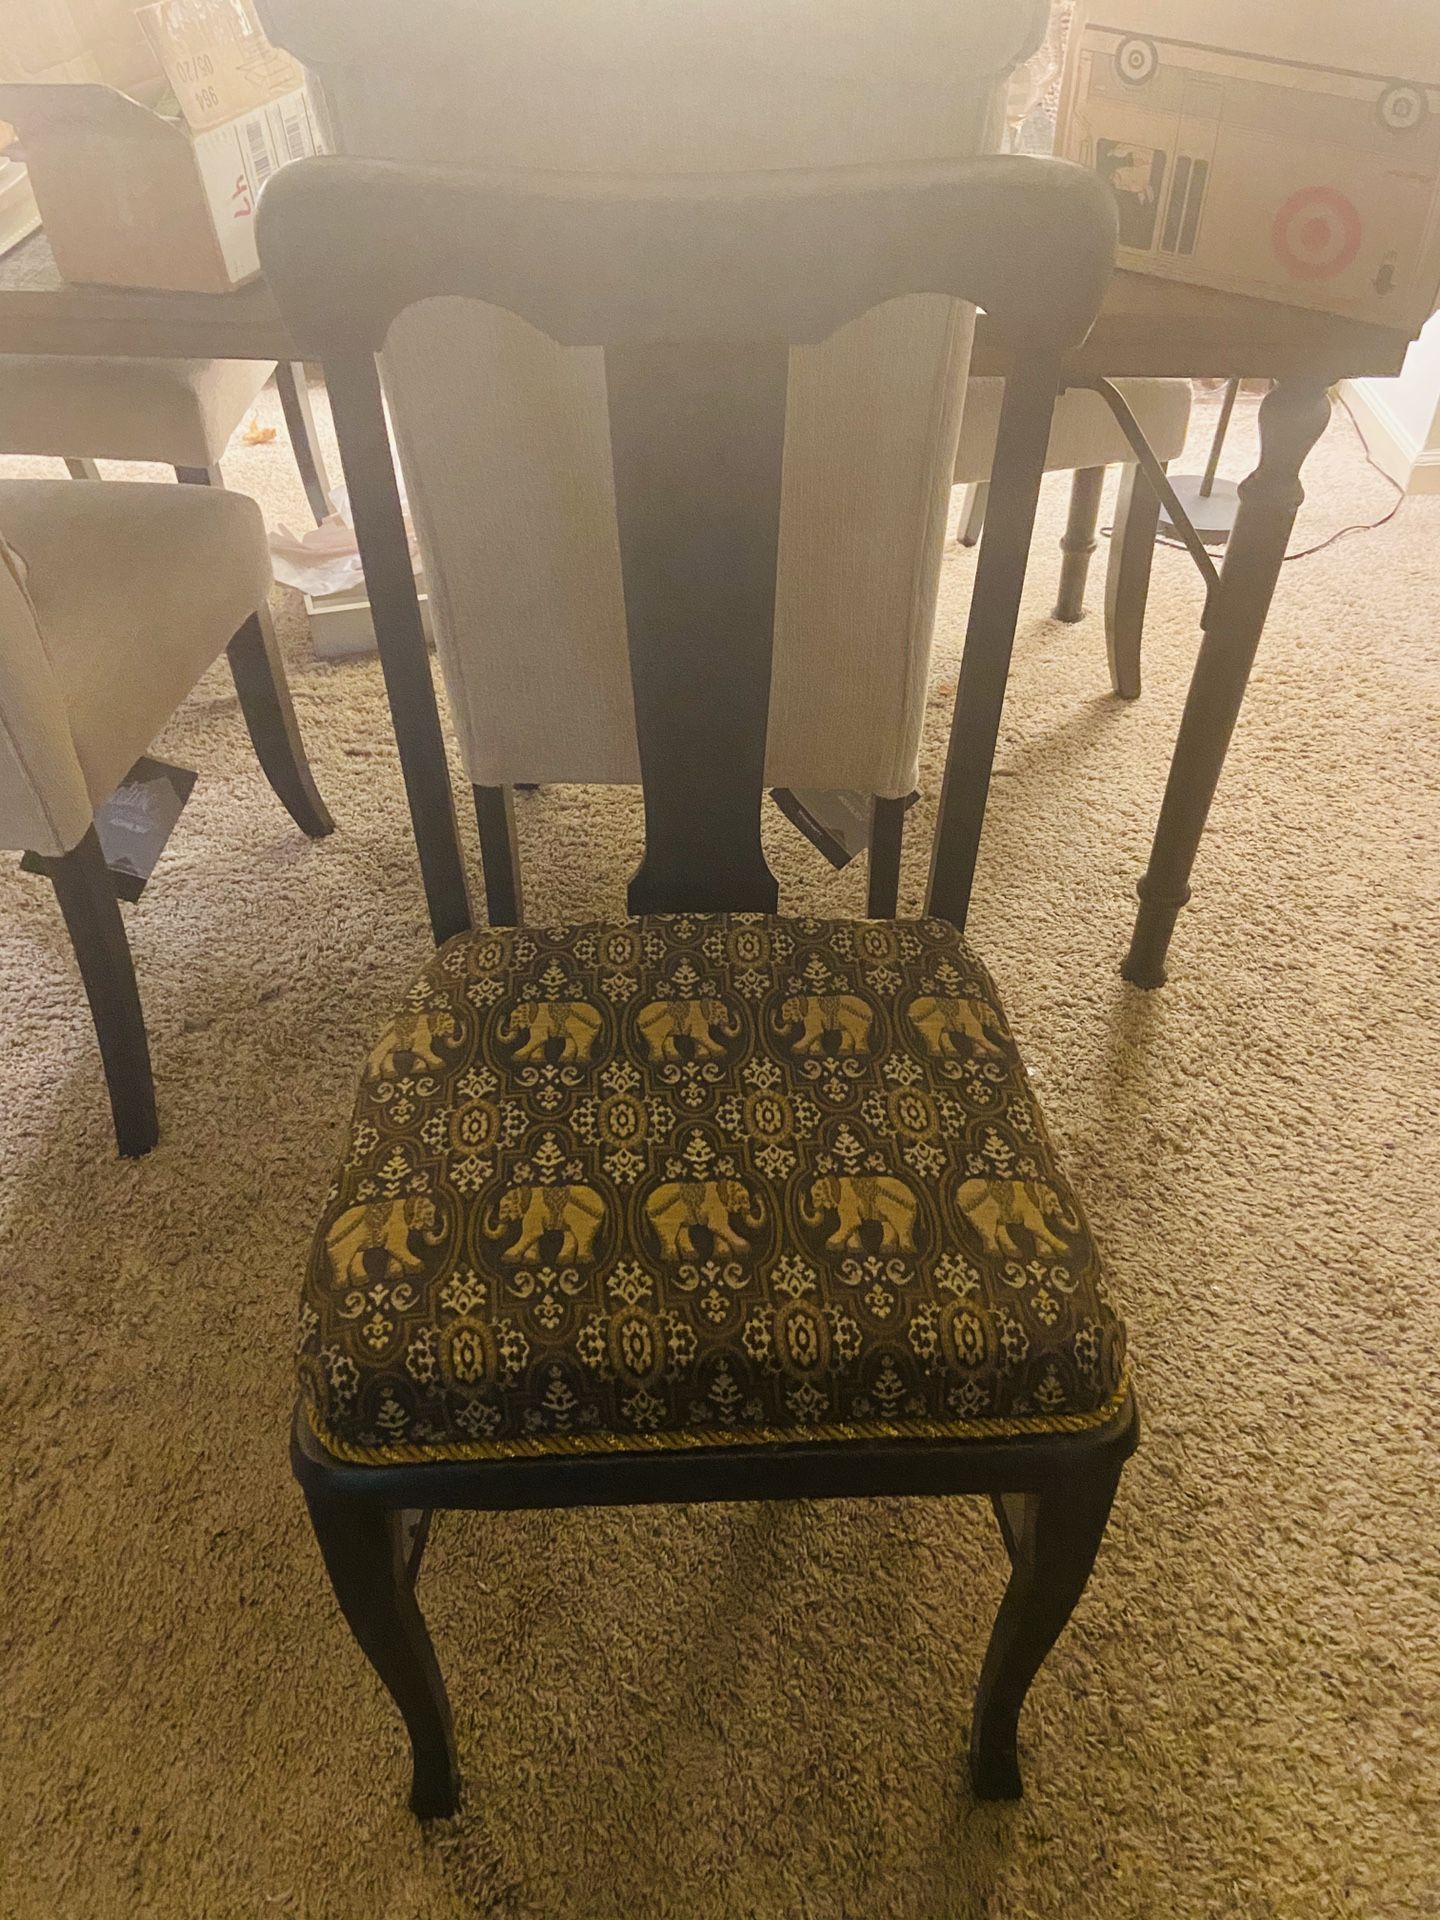 Antique chairs for sale. $30 for one, $55 for the set.